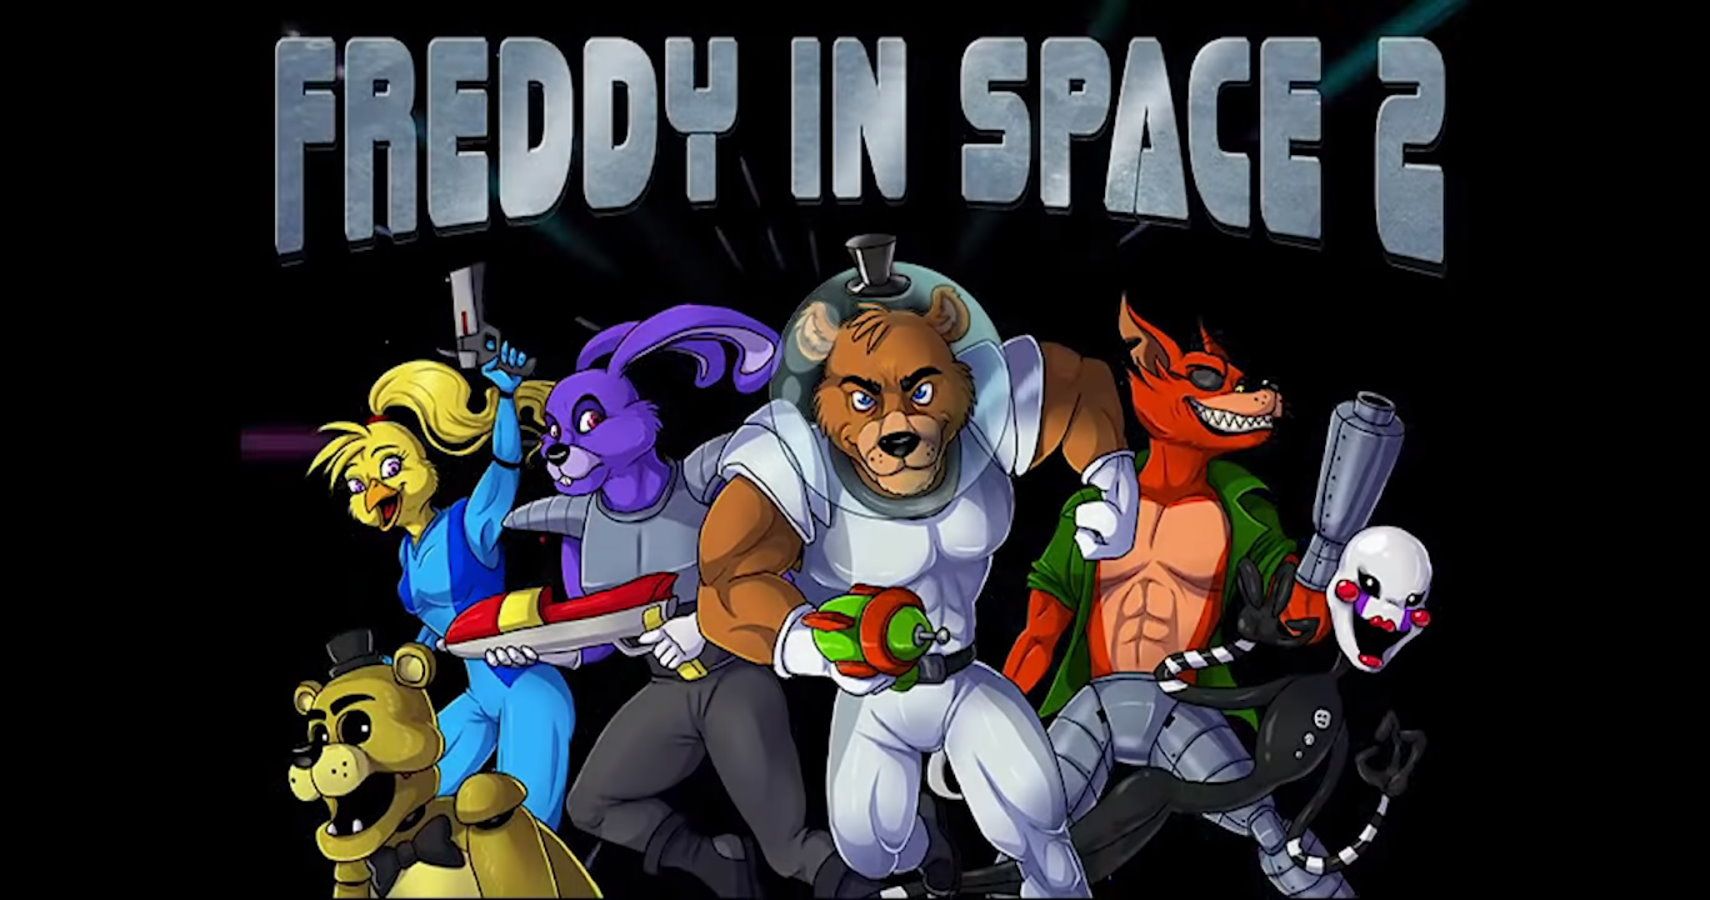 The new Five Nights at Freddy's game is a sidescrolling shooter